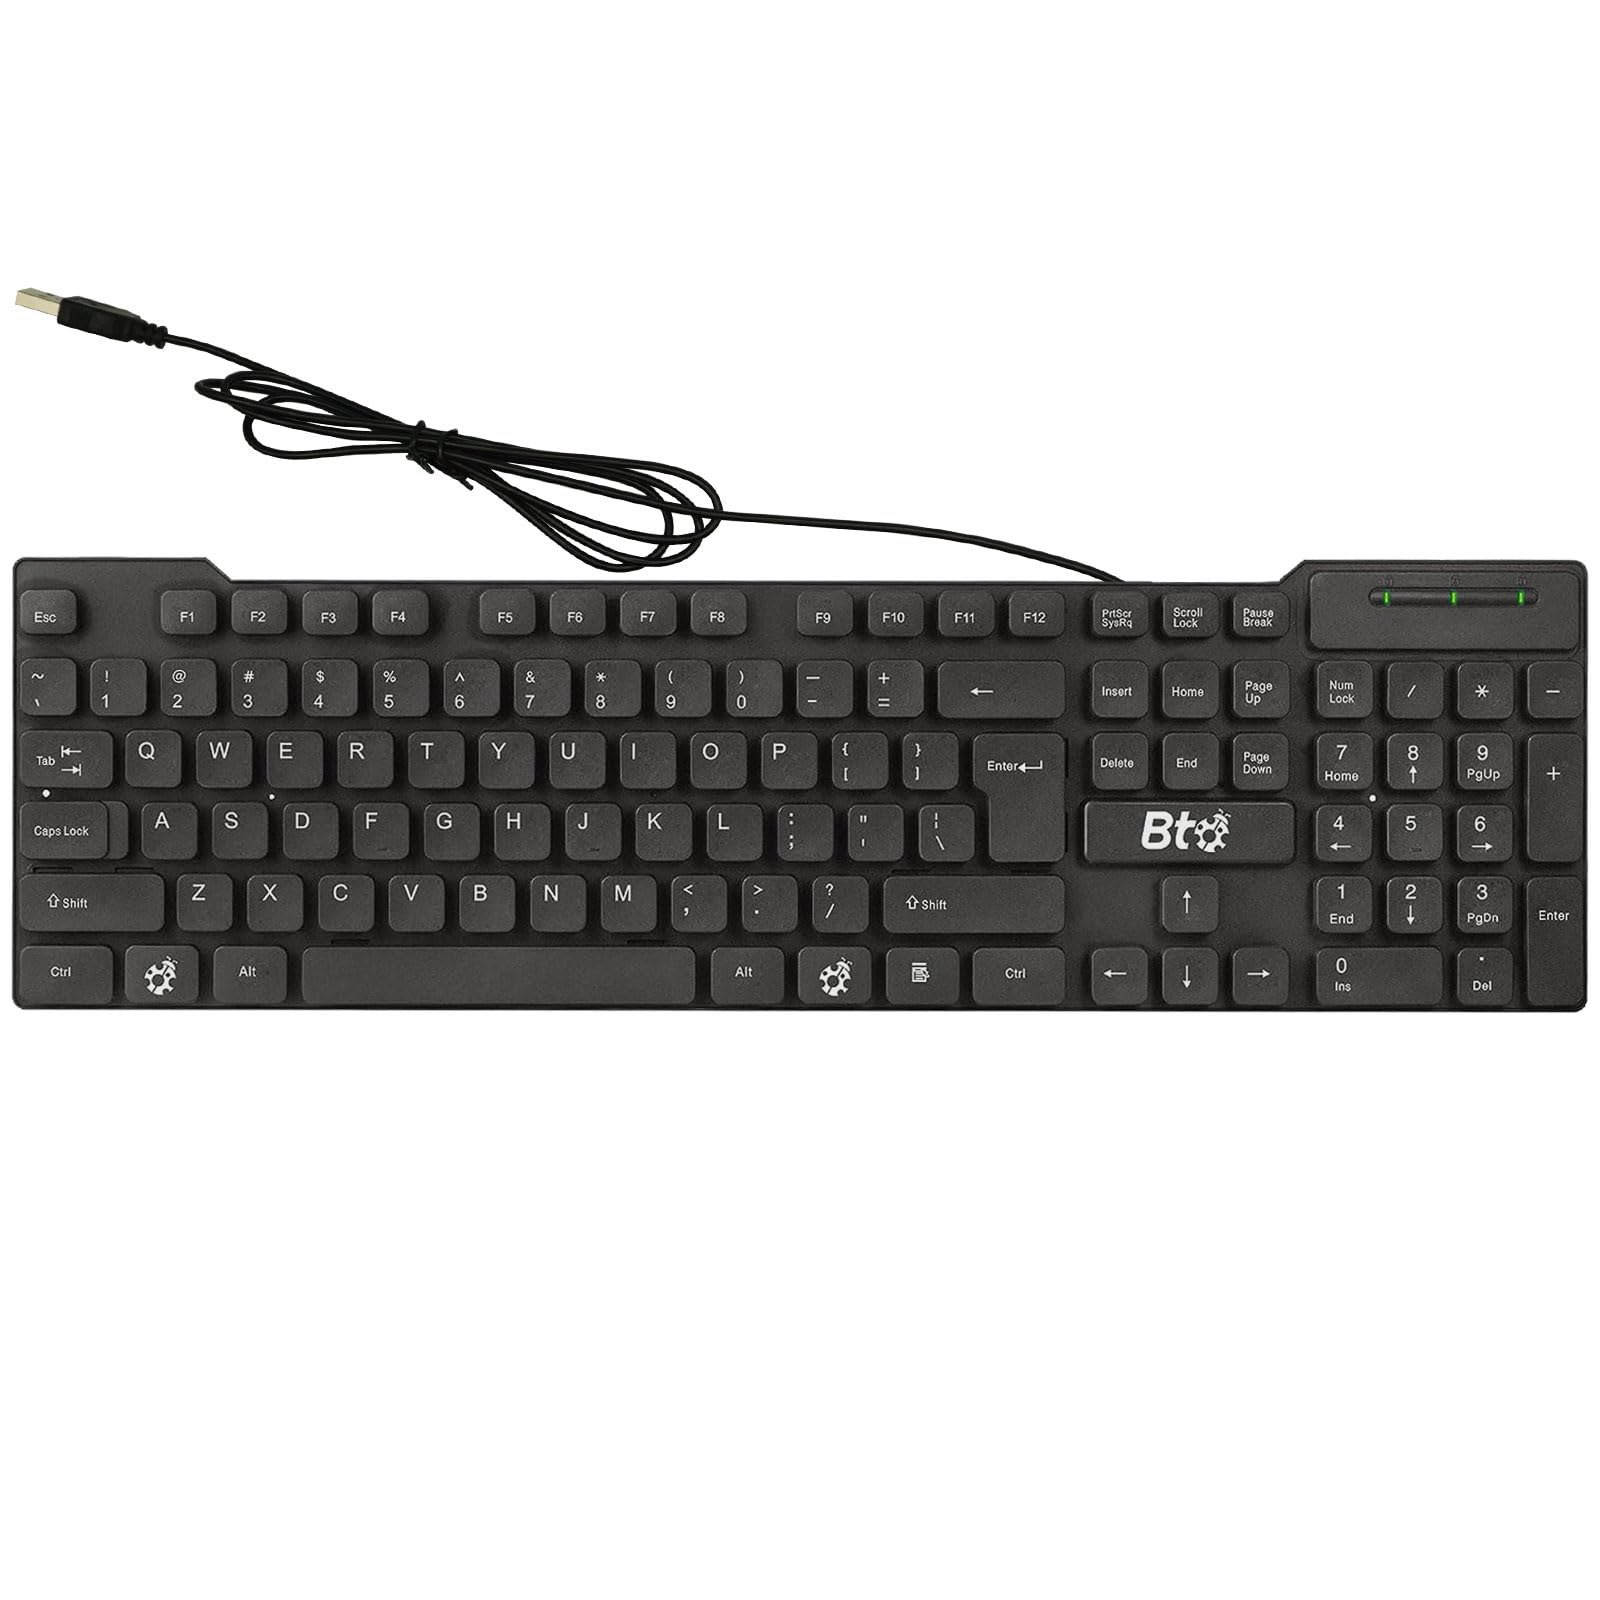 BTO USB Wired Keyboard, 104 Keys with Numeric Pad, Anti Spill and Dust Proof, Slim and Flexible Design, Compatible with Laptop Notebooks, Desktops PCs, Tablets, Towers, Windows 7, 8, 10, 11